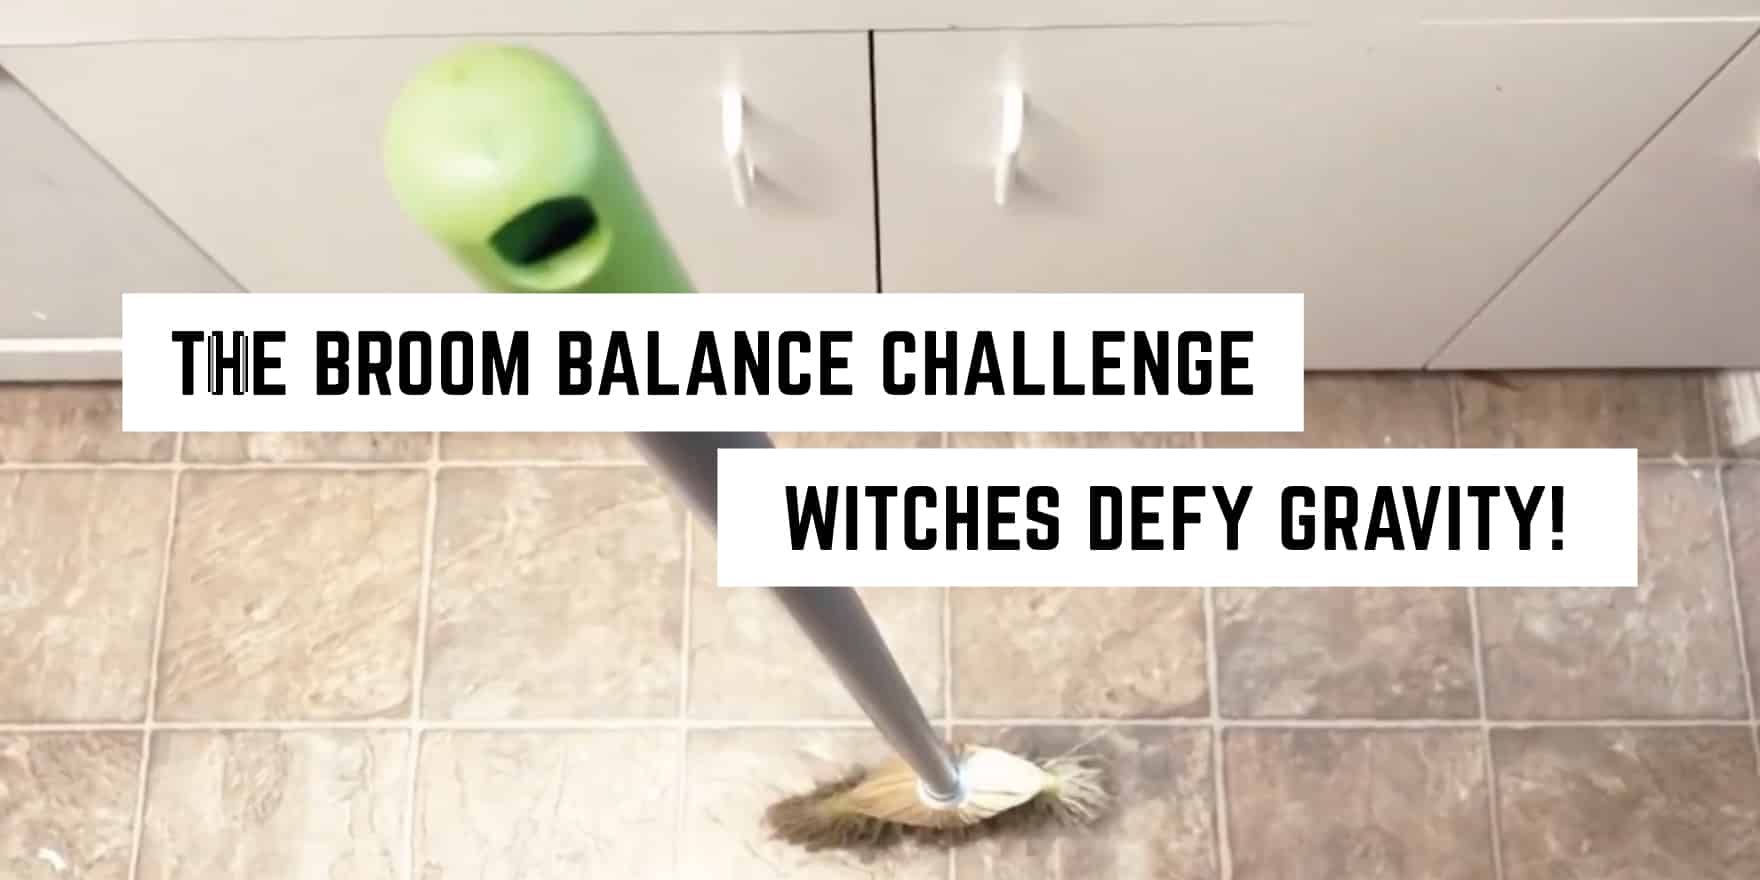 Broom stands upright on its own in a curious display of the broom balance challenge: when household objects mimic magical levitation, a new age product found in metaphysical shops!